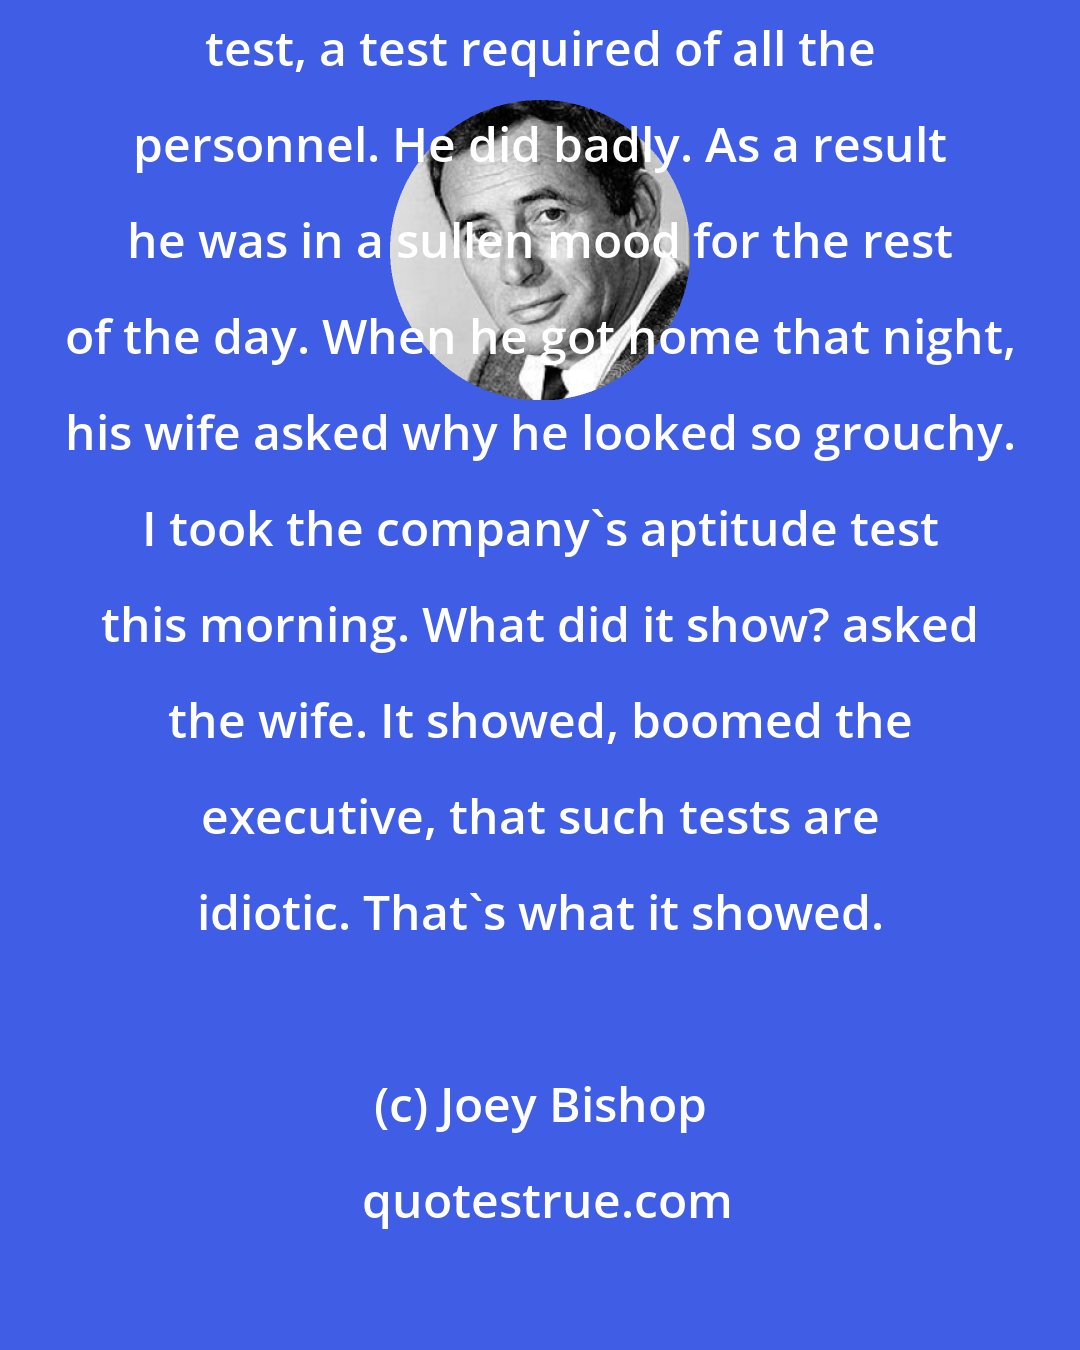 Joey Bishop: The president of a TV network generously agreed to take his company's aptitude test, a test required of all the personnel. He did badly. As a result he was in a sullen mood for the rest of the day. When he got home that night, his wife asked why he looked so grouchy. I took the company's aptitude test this morning. What did it show? asked the wife. It showed, boomed the executive, that such tests are idiotic. That's what it showed.